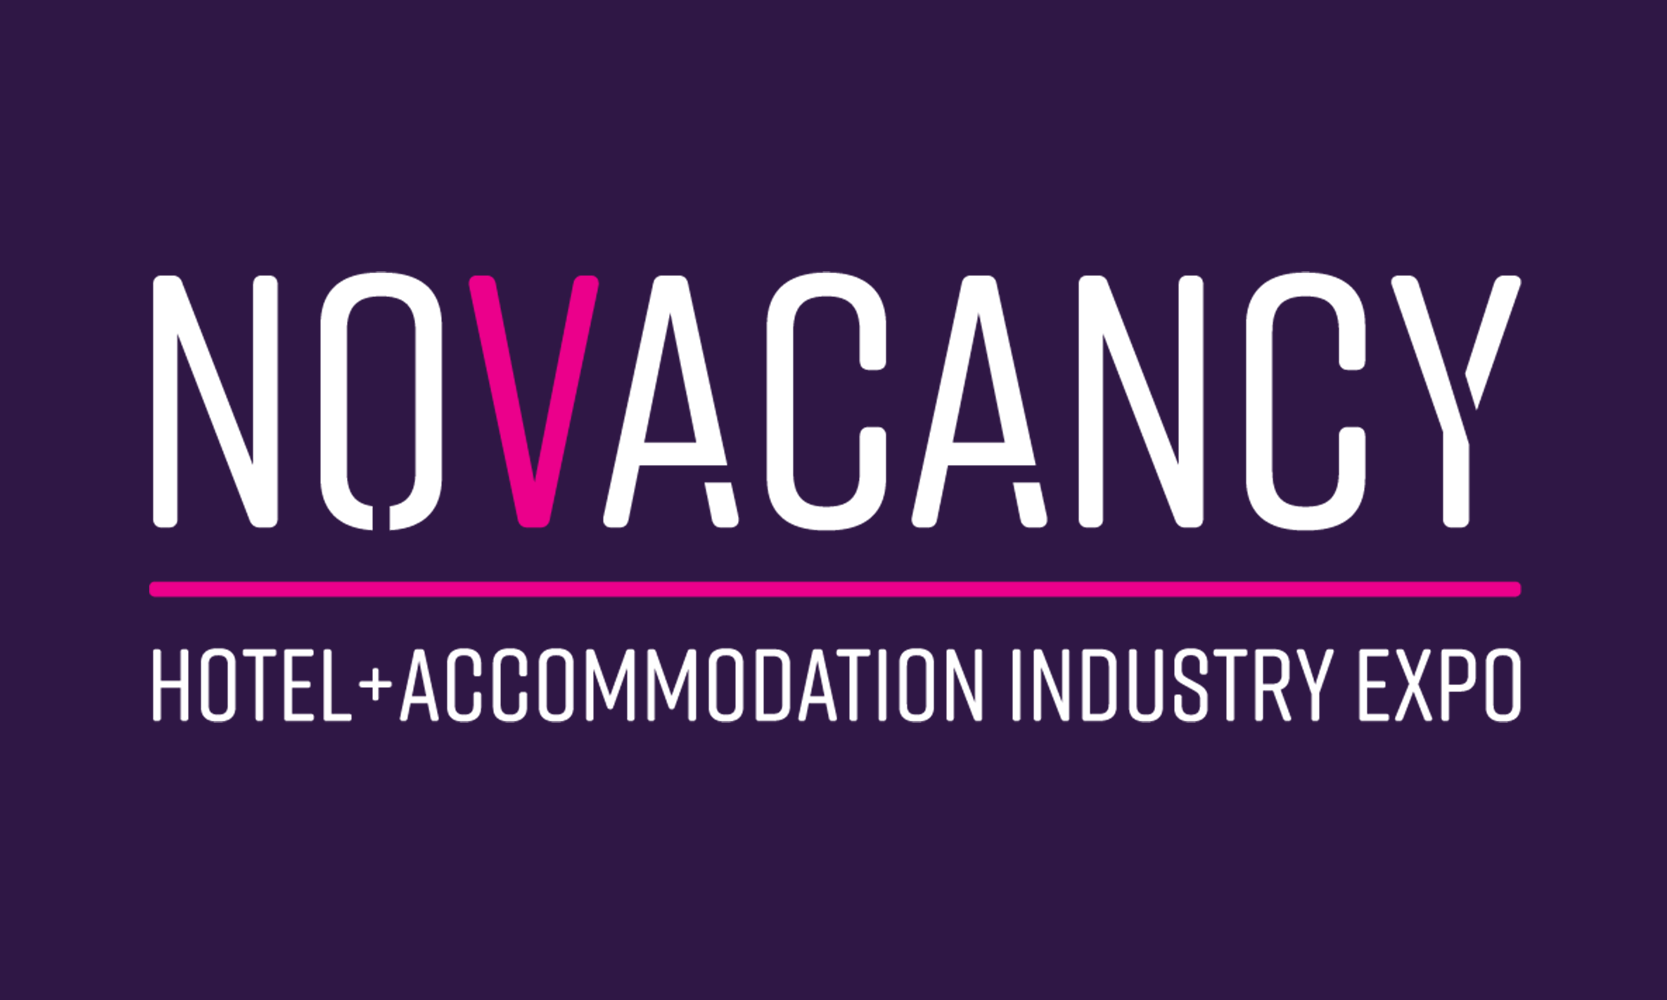 NoVacancy Hotel + Accommodation Industry Expo, Central, New South Wales, Australia